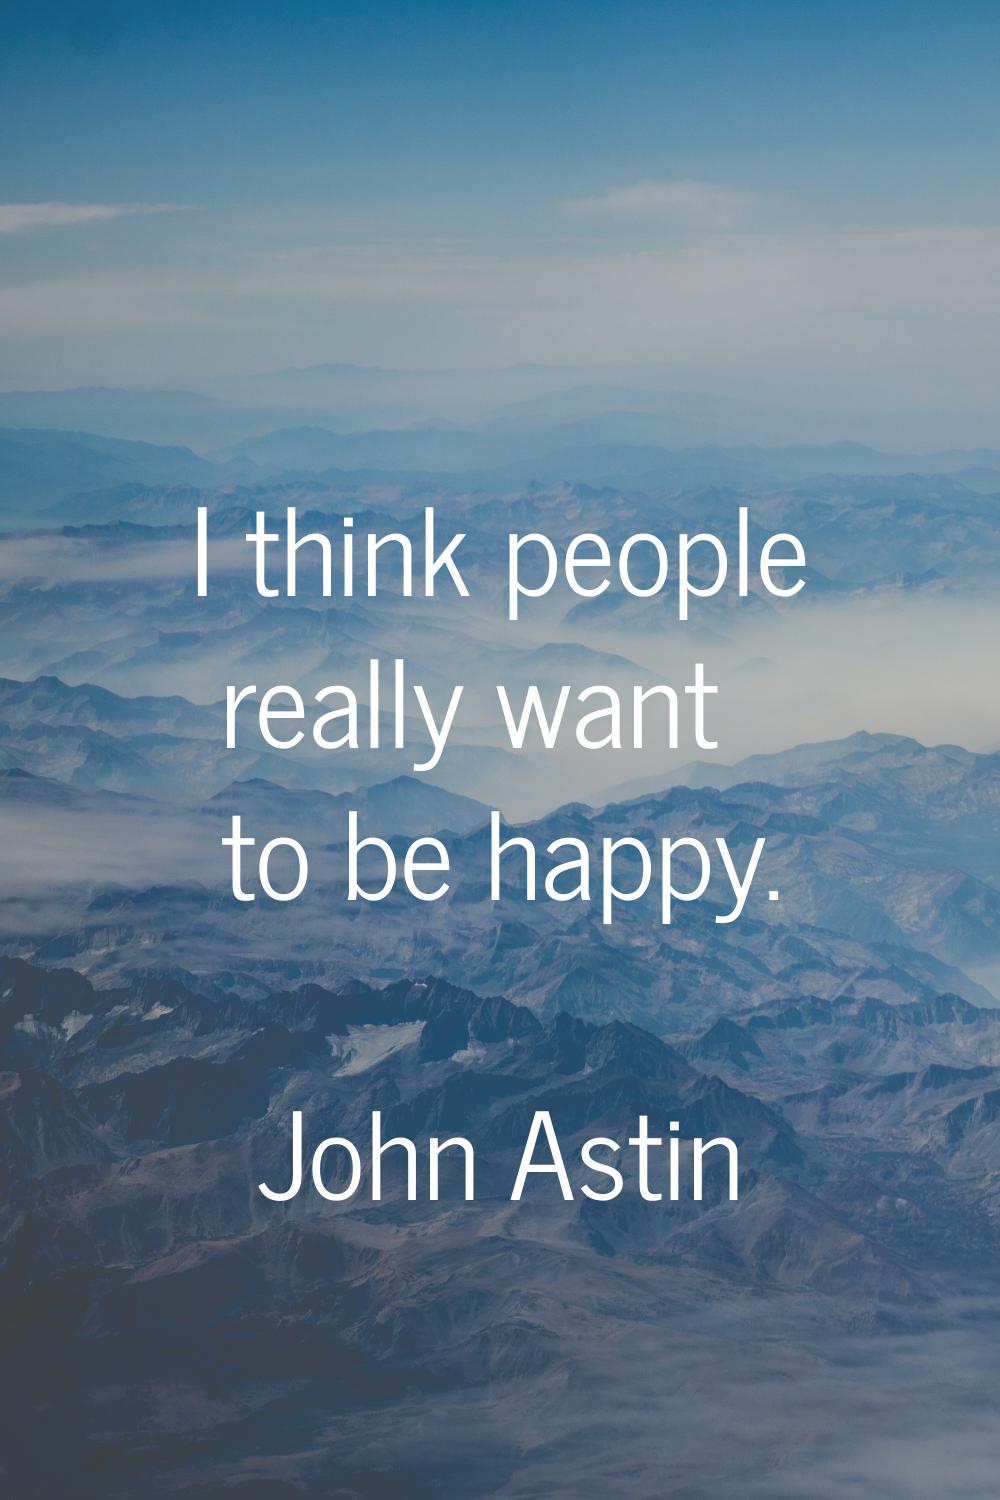 I think people really want to be happy.